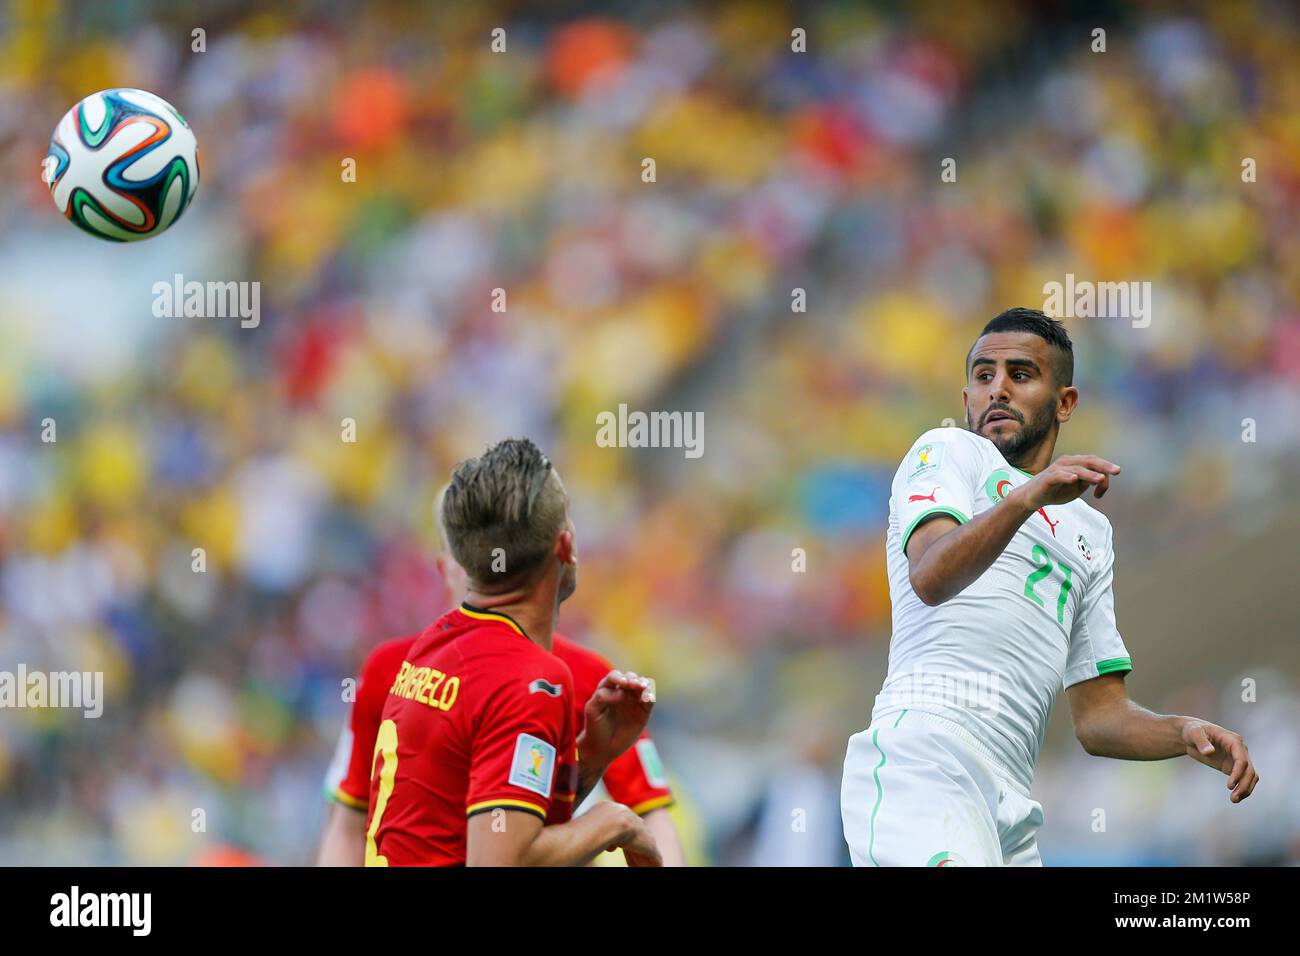 Belgium's Toby Alderweireld and Algeria's Riyad Mahrez fight for the ball during a soccer game between Belgian national team The Red Devils and Algeria in Belo Horizonte, Brazil, the first game in Group H of the first round of the 2014 FIFA World Cup, Tuesday 17 June 2014. Stock Photo